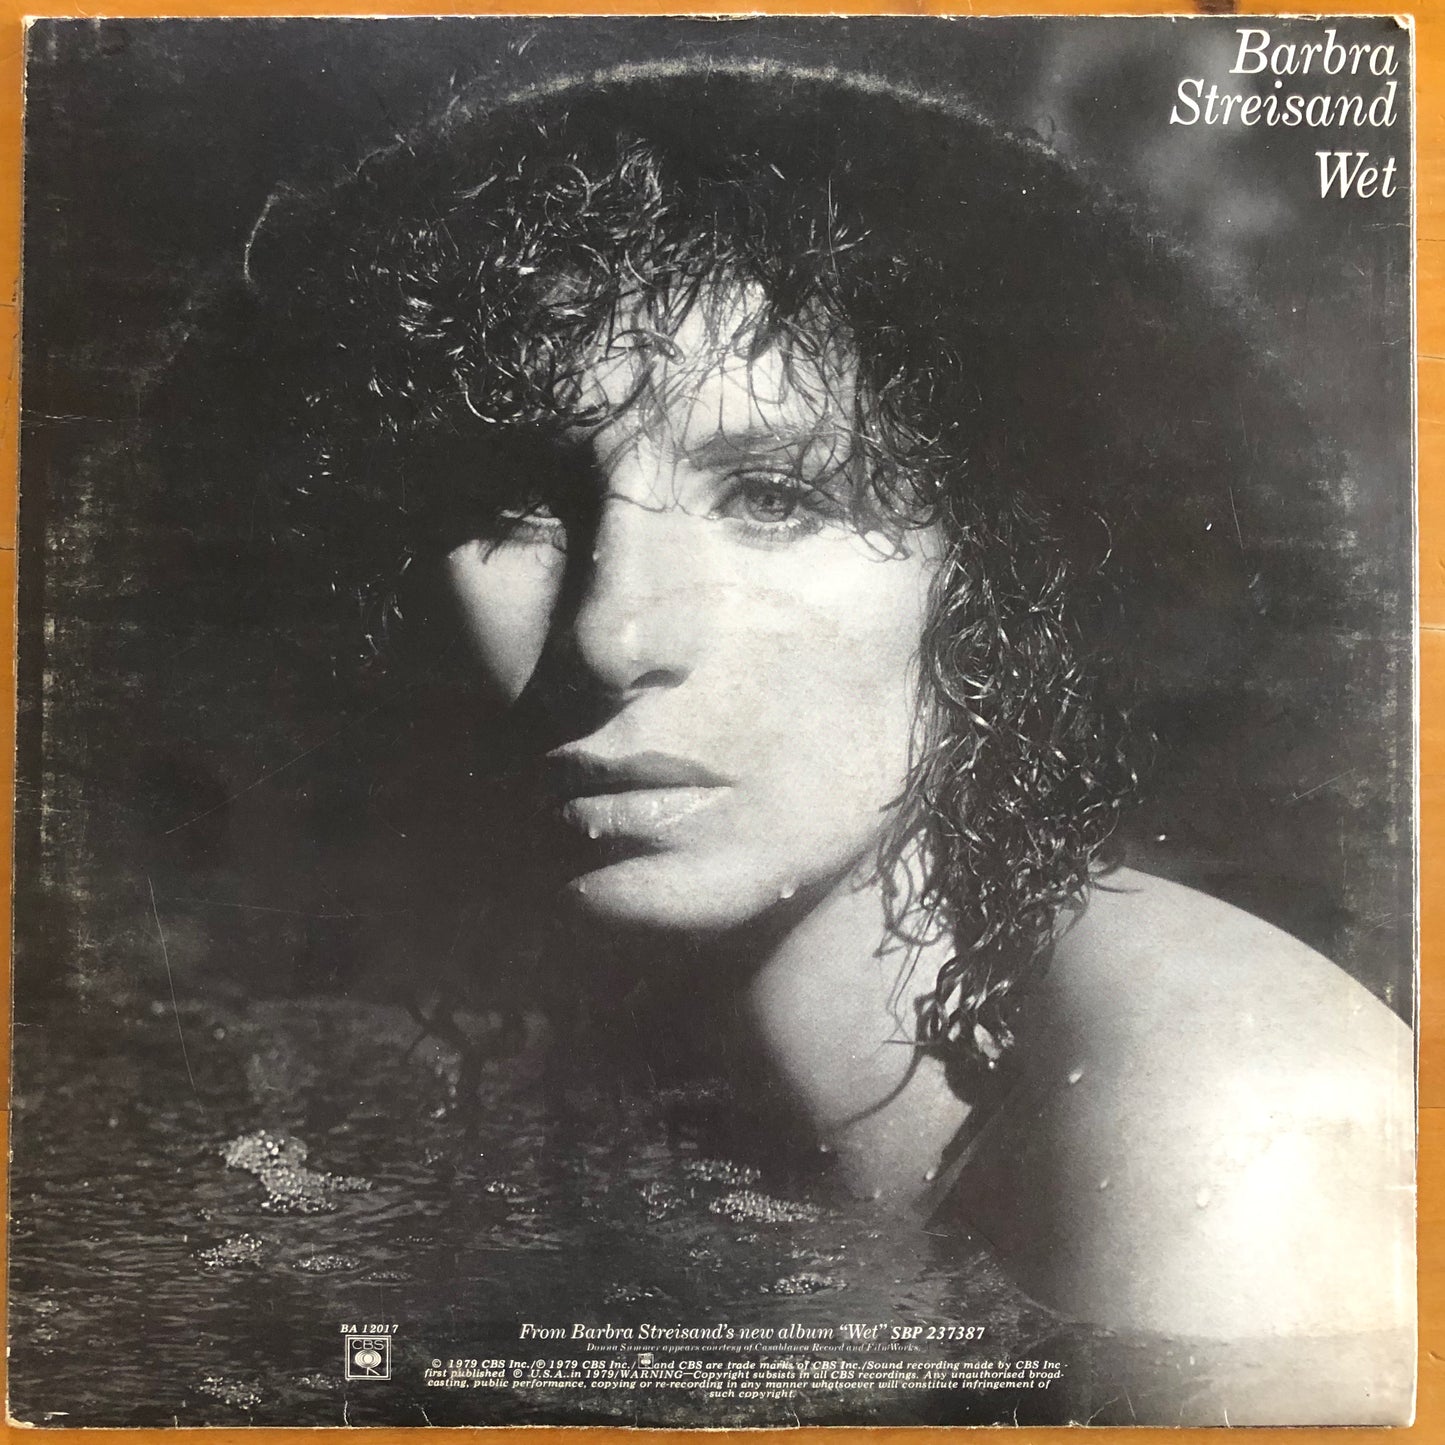 Barbra Streisand & Donna Summer - No More Tears / Enough Is Enough (12" single)